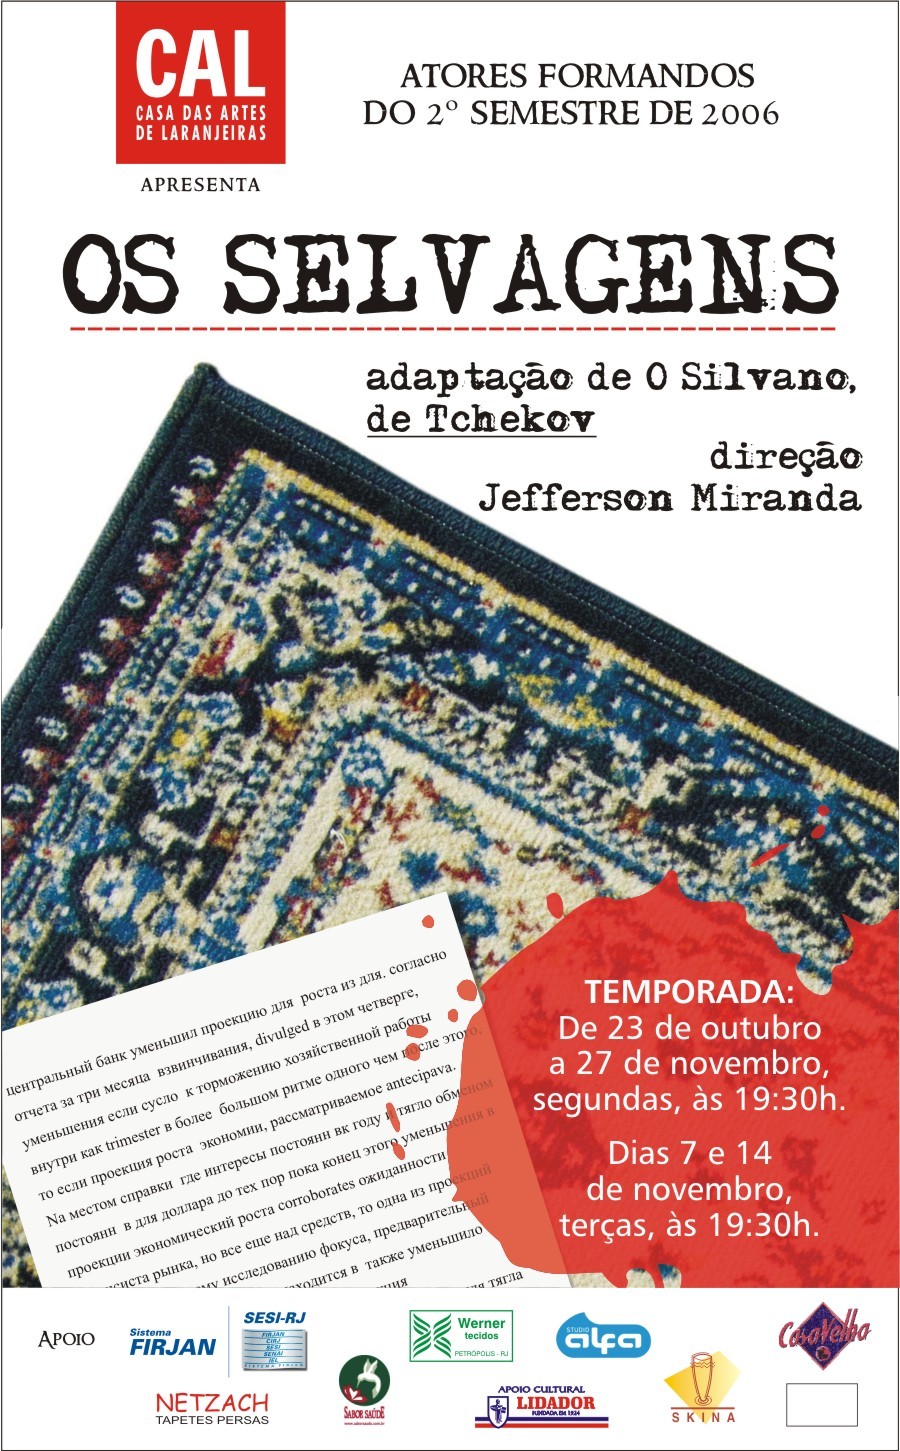 OS SELVAGENS